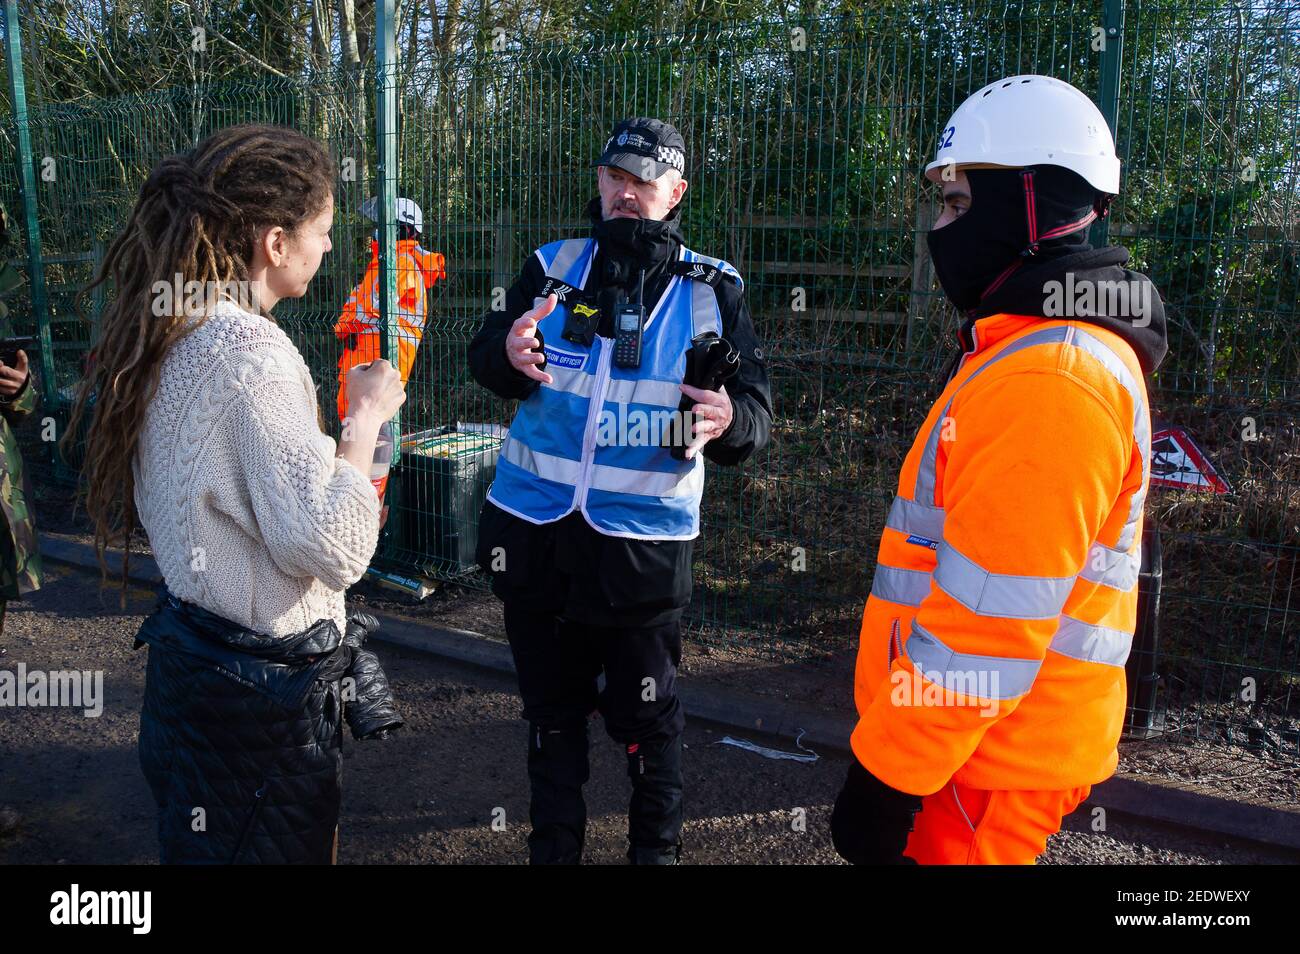 Wendover, Buckinghamshire, UK. 15th February, 2021. An activist asks a Police Liaison Officer why HS2 have confiscated her personal belongings and not returned them. HS2 Ltd have this morning fenced off a public footpath and started fencing off an area of woodland known as the Spinney in readiness to fell numerous mature trees as part of the High Speed 2 rail link from London to Birmingham. The landowner was allegedly not notified by HS2 Ltd in advance. National Eviction Team (NET) bailiffs working for HS2 were on site as were a large number of police who were using a drone above the woods. An Stock Photo